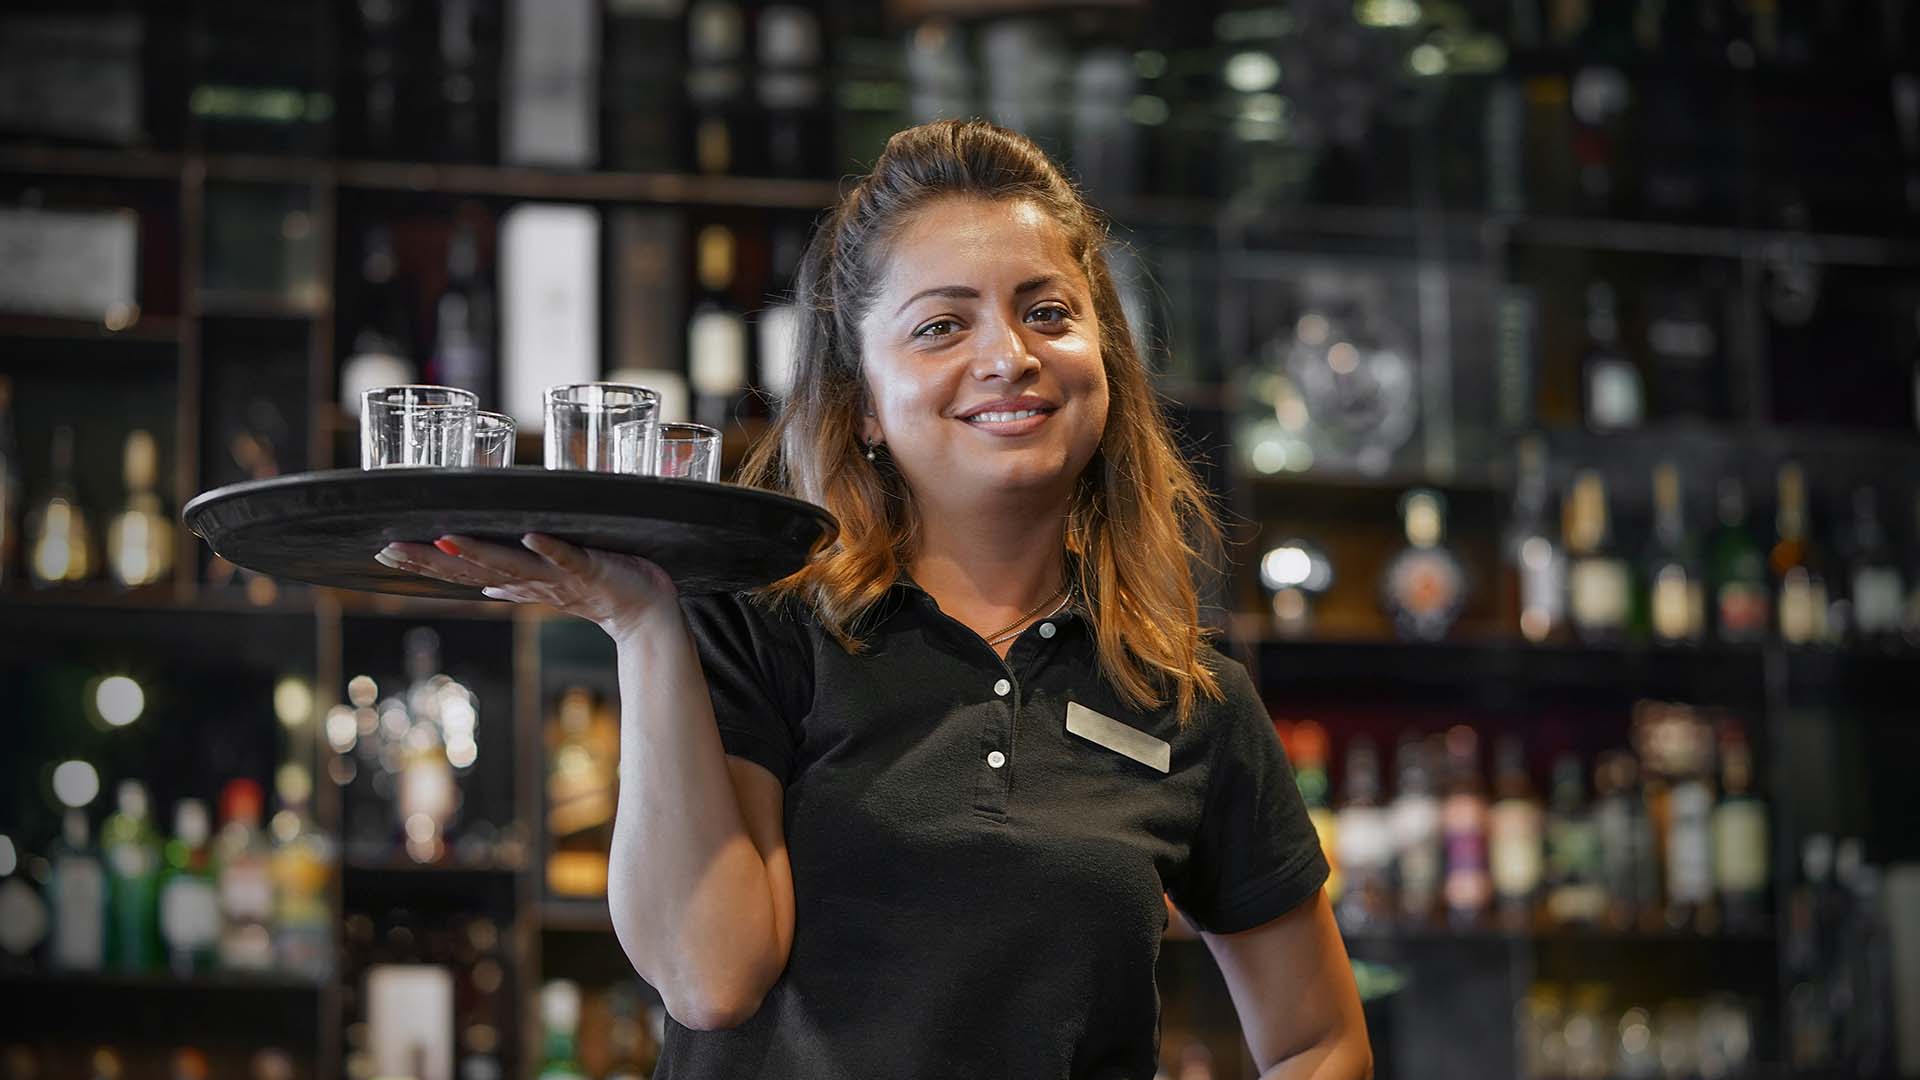 A server smiles in a restaurant